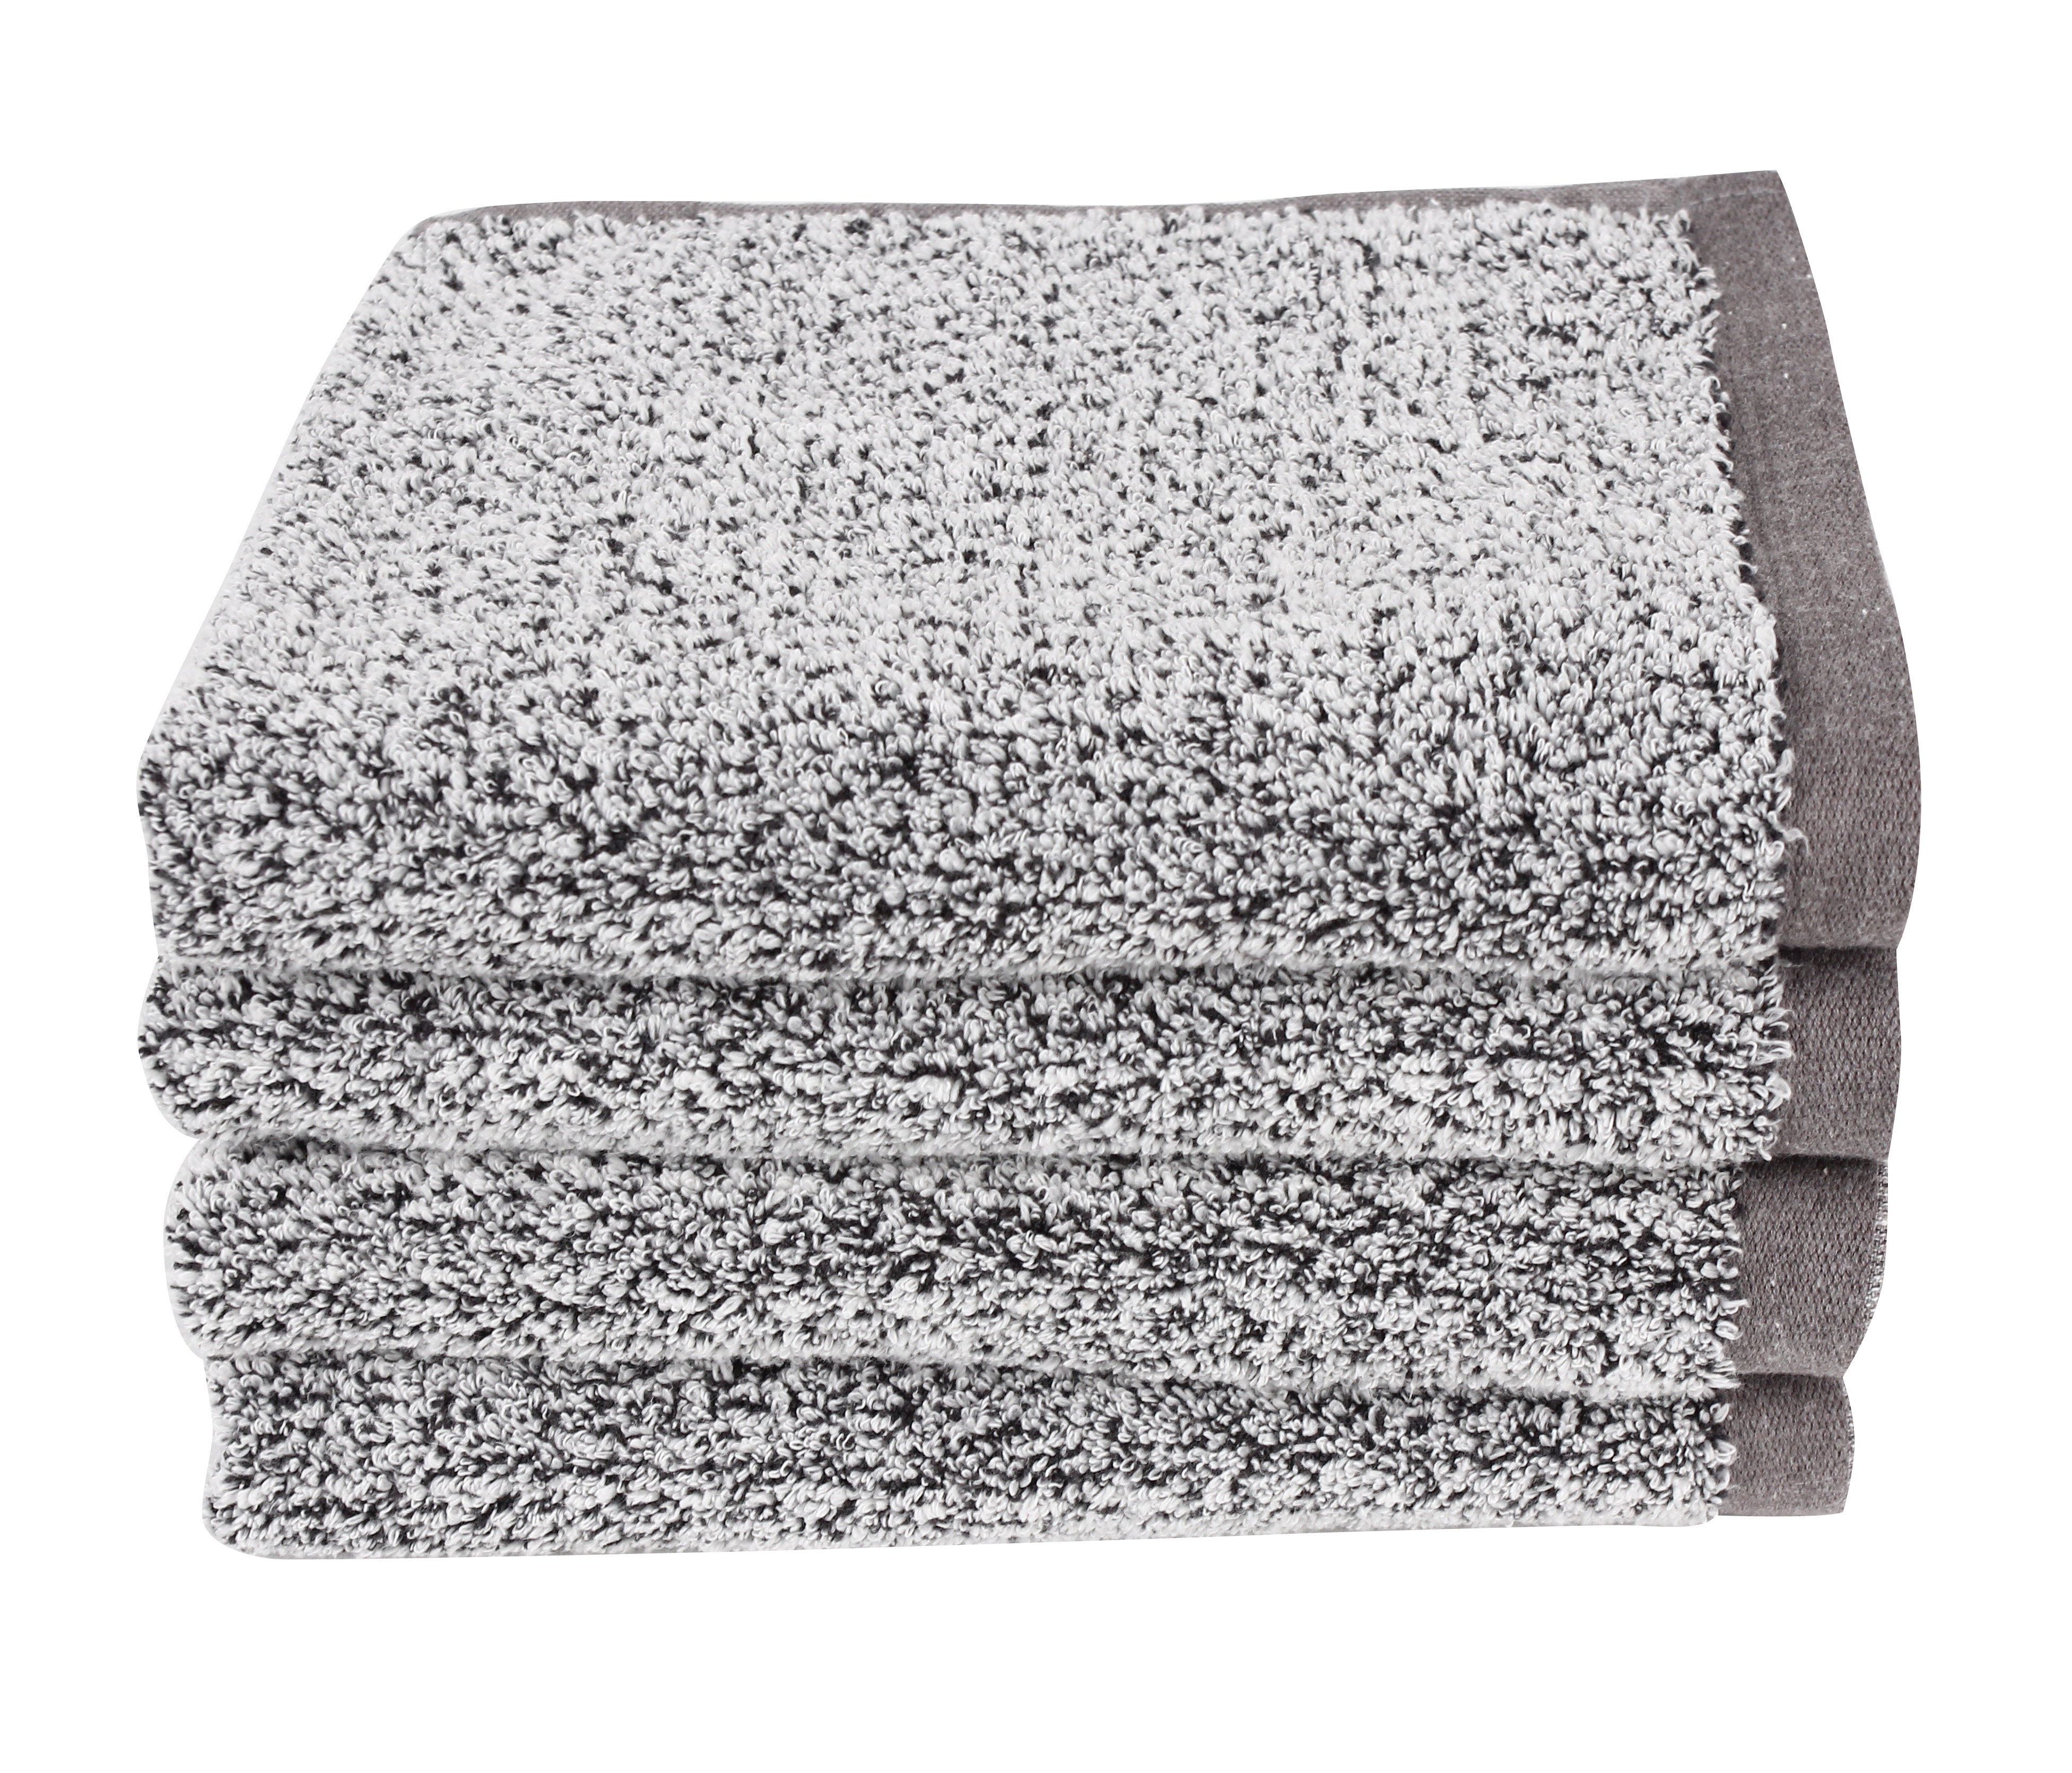 Terry Cloth Fabric Sold by the Meter 15 Colors Cotton Towel